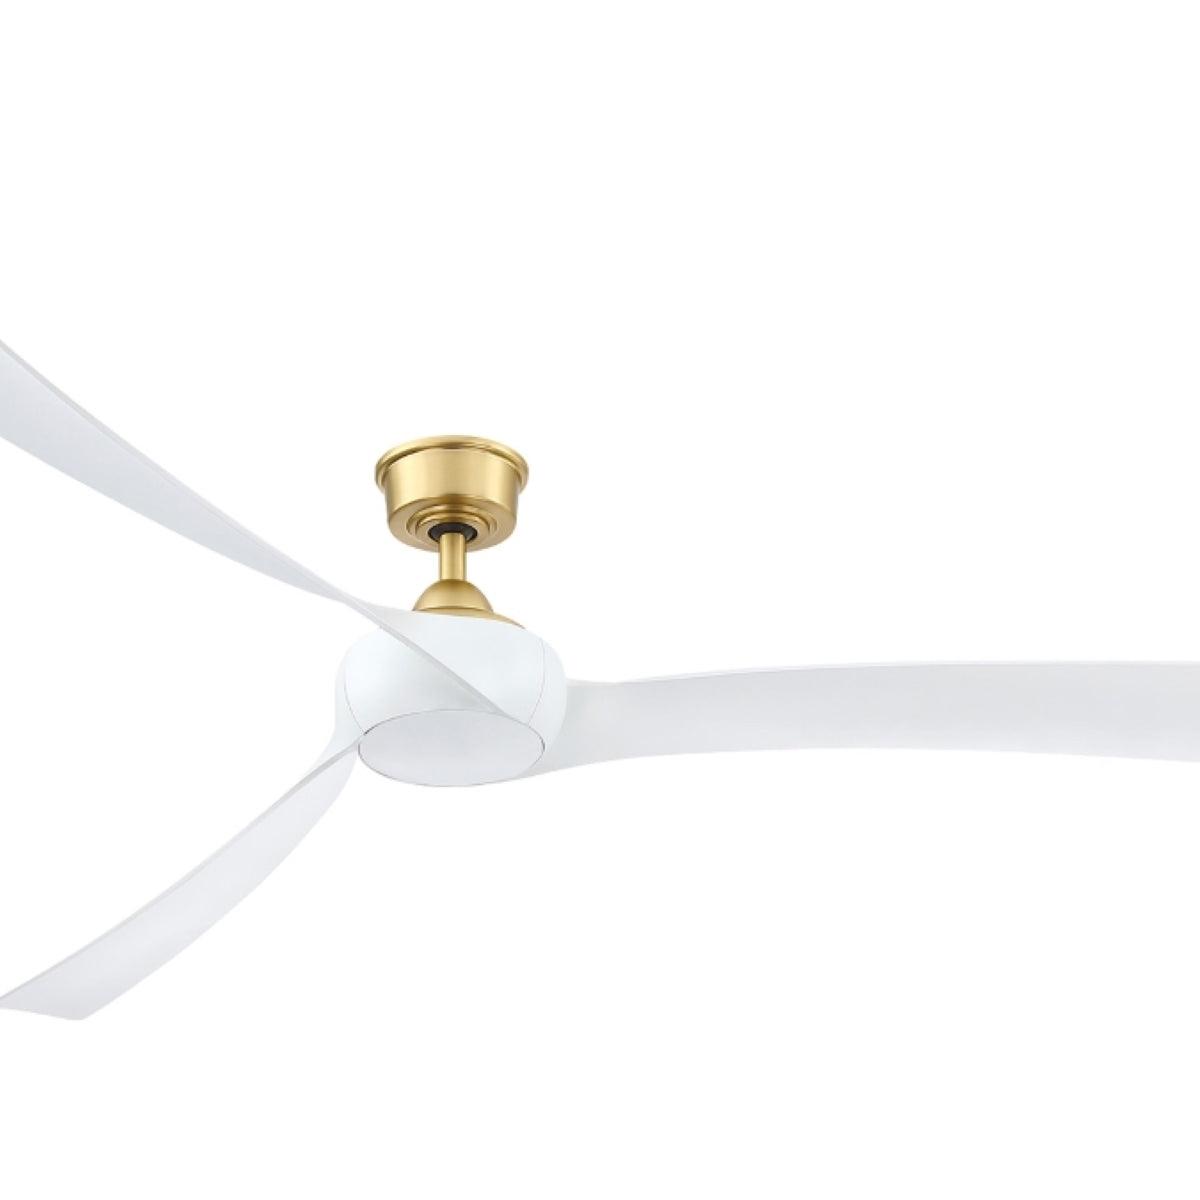 Wrap Custom Indoor/Outdoor Ceiling Fan Motor With Remote, Brushed Satin Brass Finish, 64-84" Blades Sold Separately - Bees Lighting